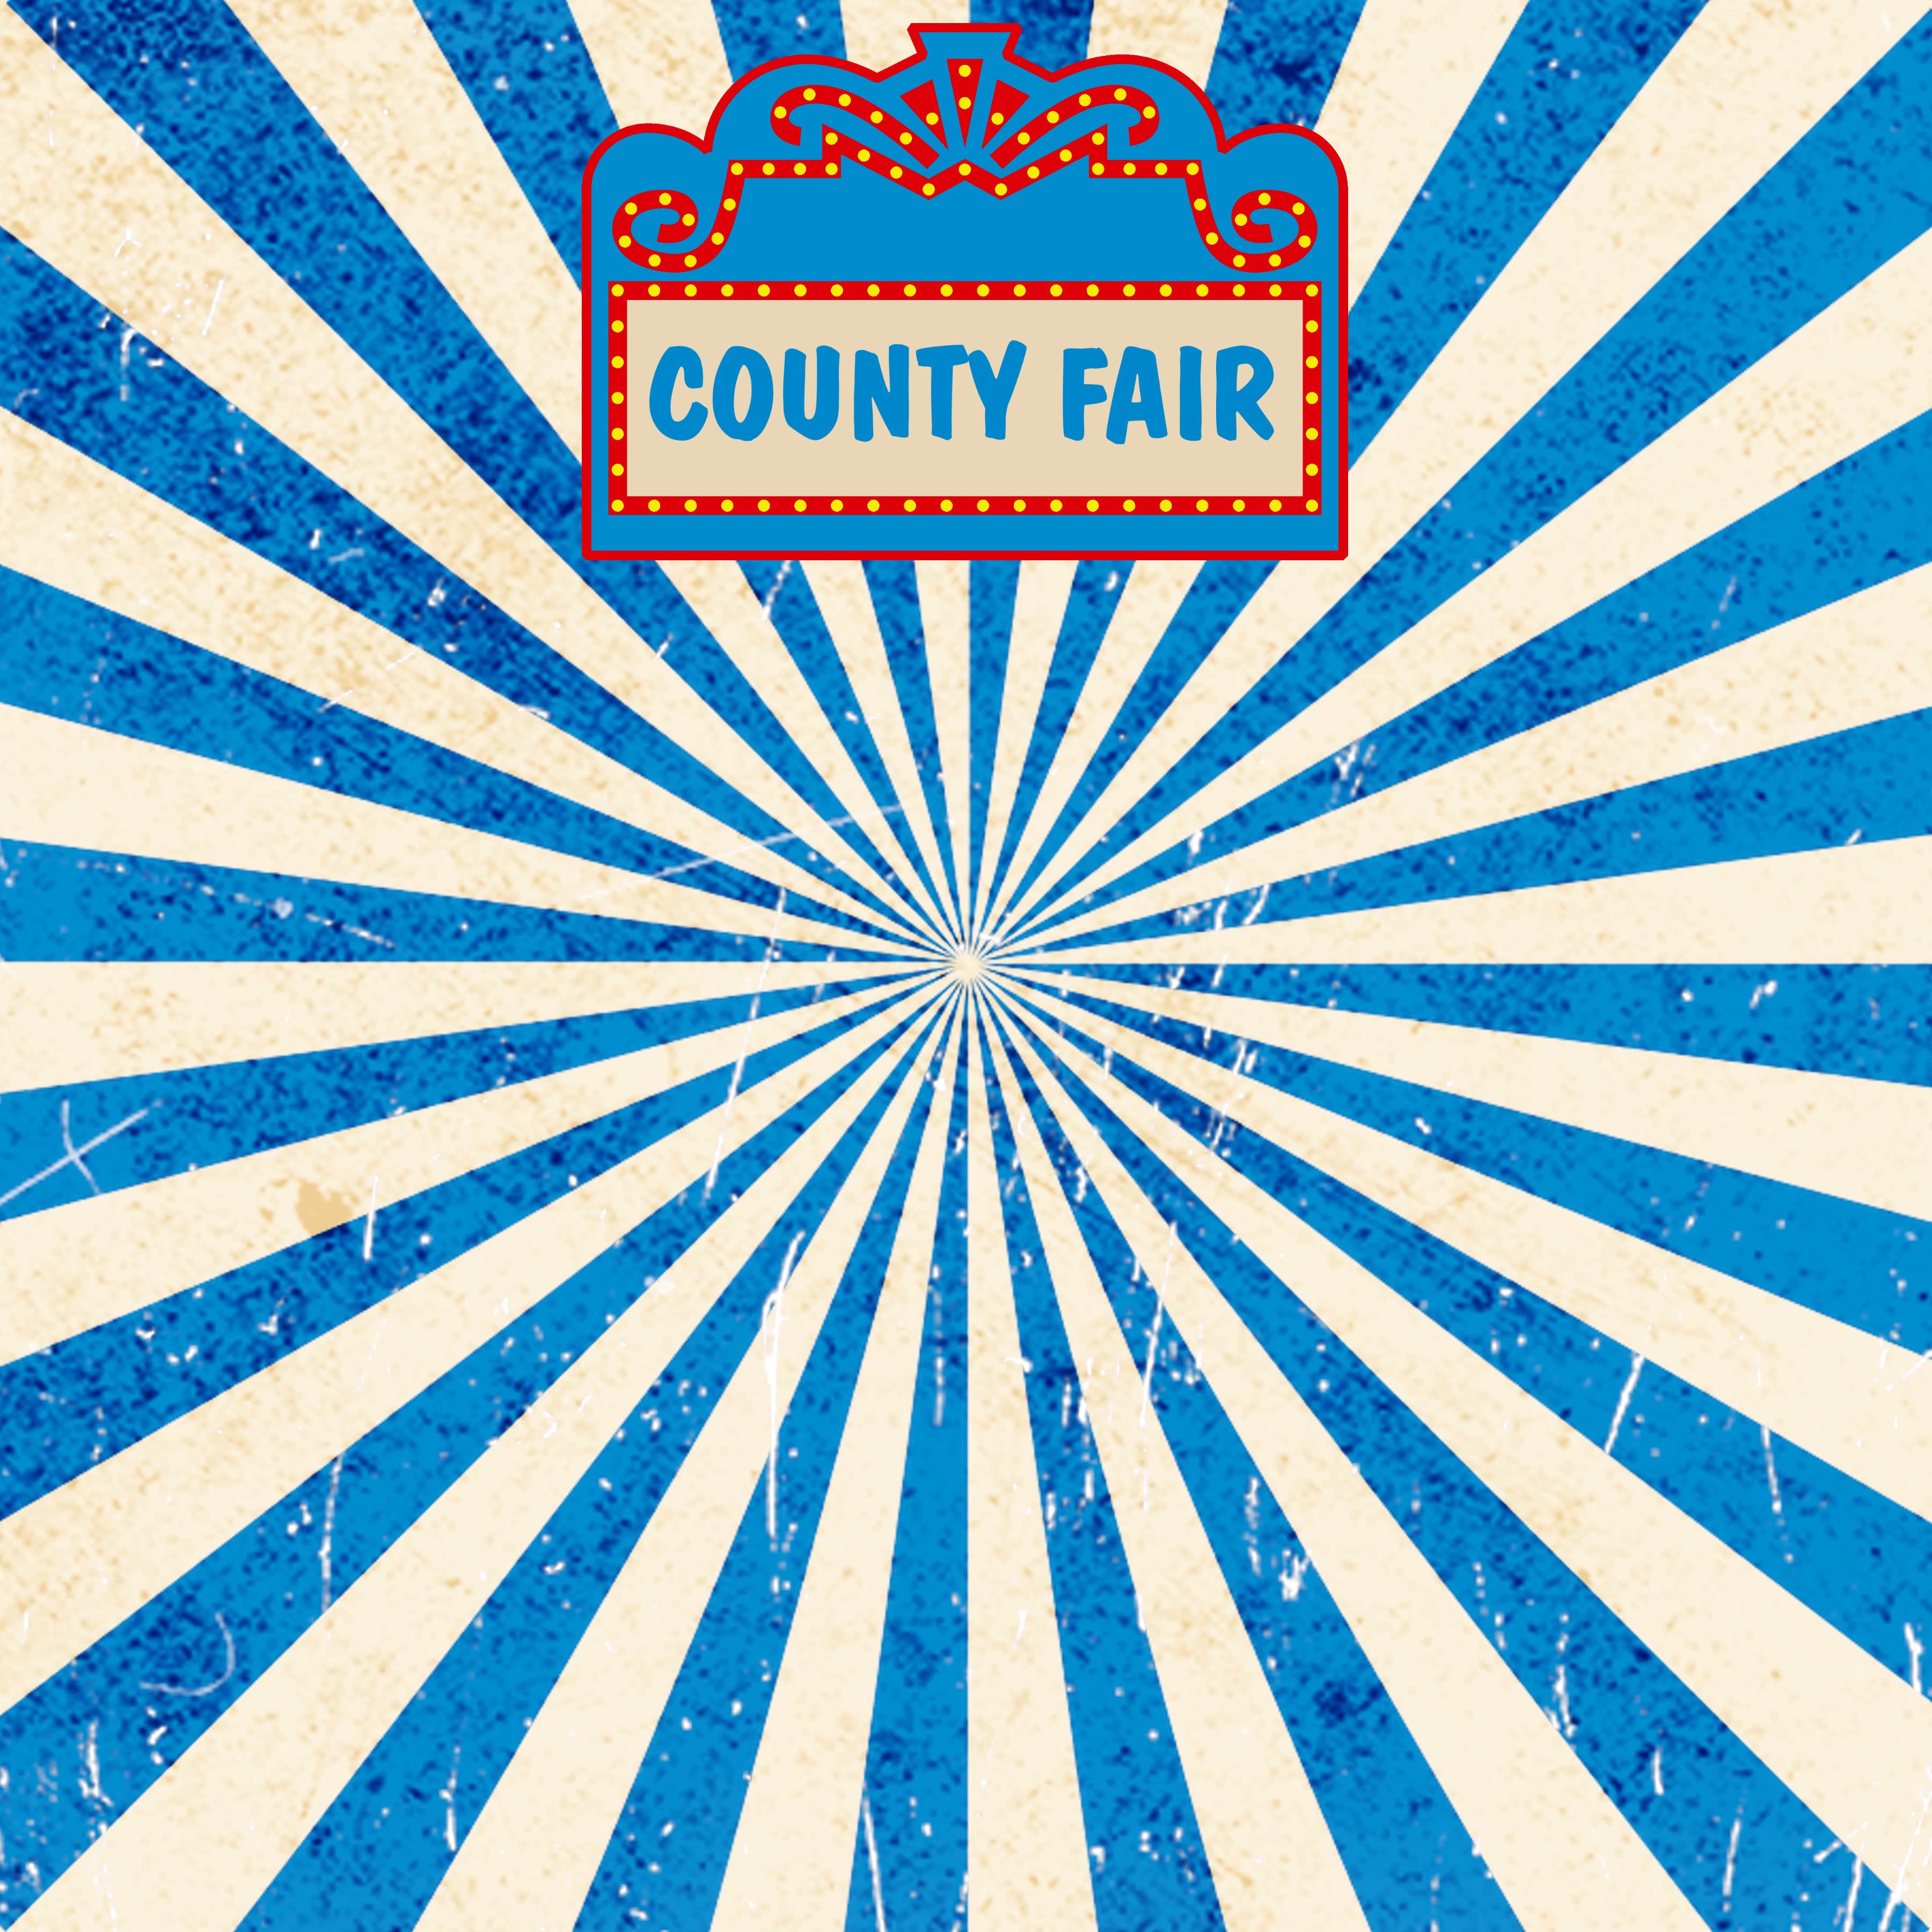 Fun At The Fair Collection County Fair 12 x 12 Double-Sided Scrapbook Paper by SSC Designs